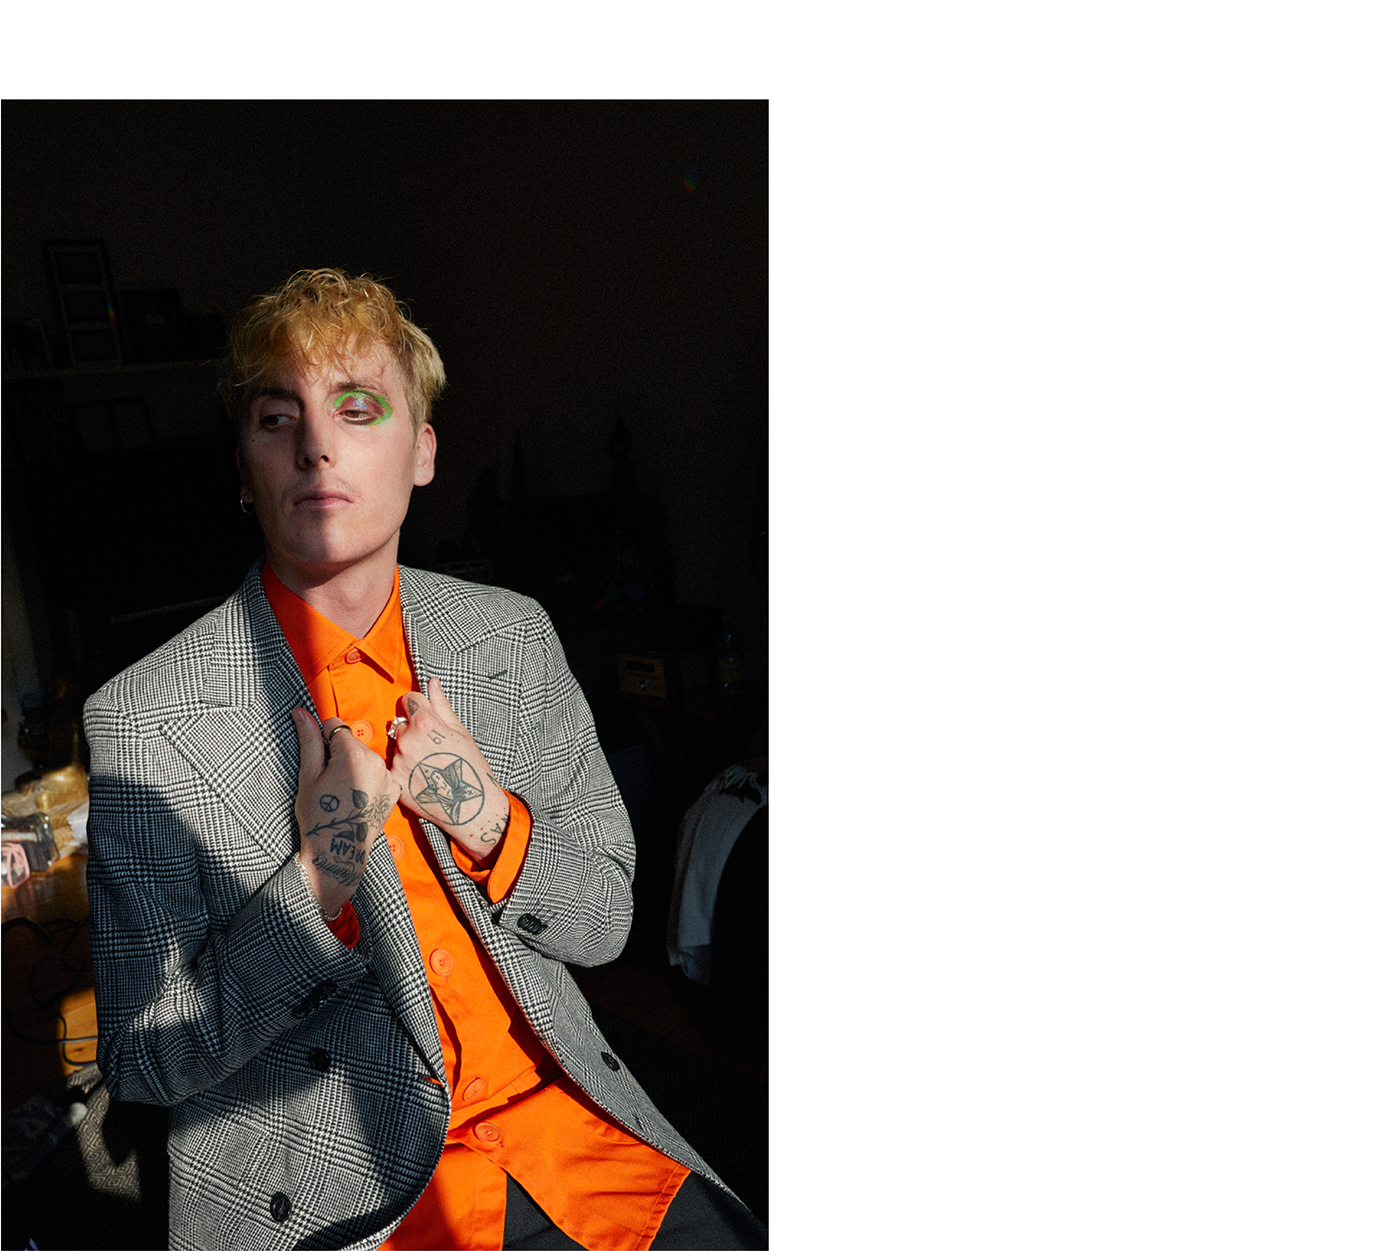 Jacket by Oscar Jacobson. Top by Schnayderman’s. Trousers by Acne Studios. Bracelet, talent's own. Rings by All Blues.